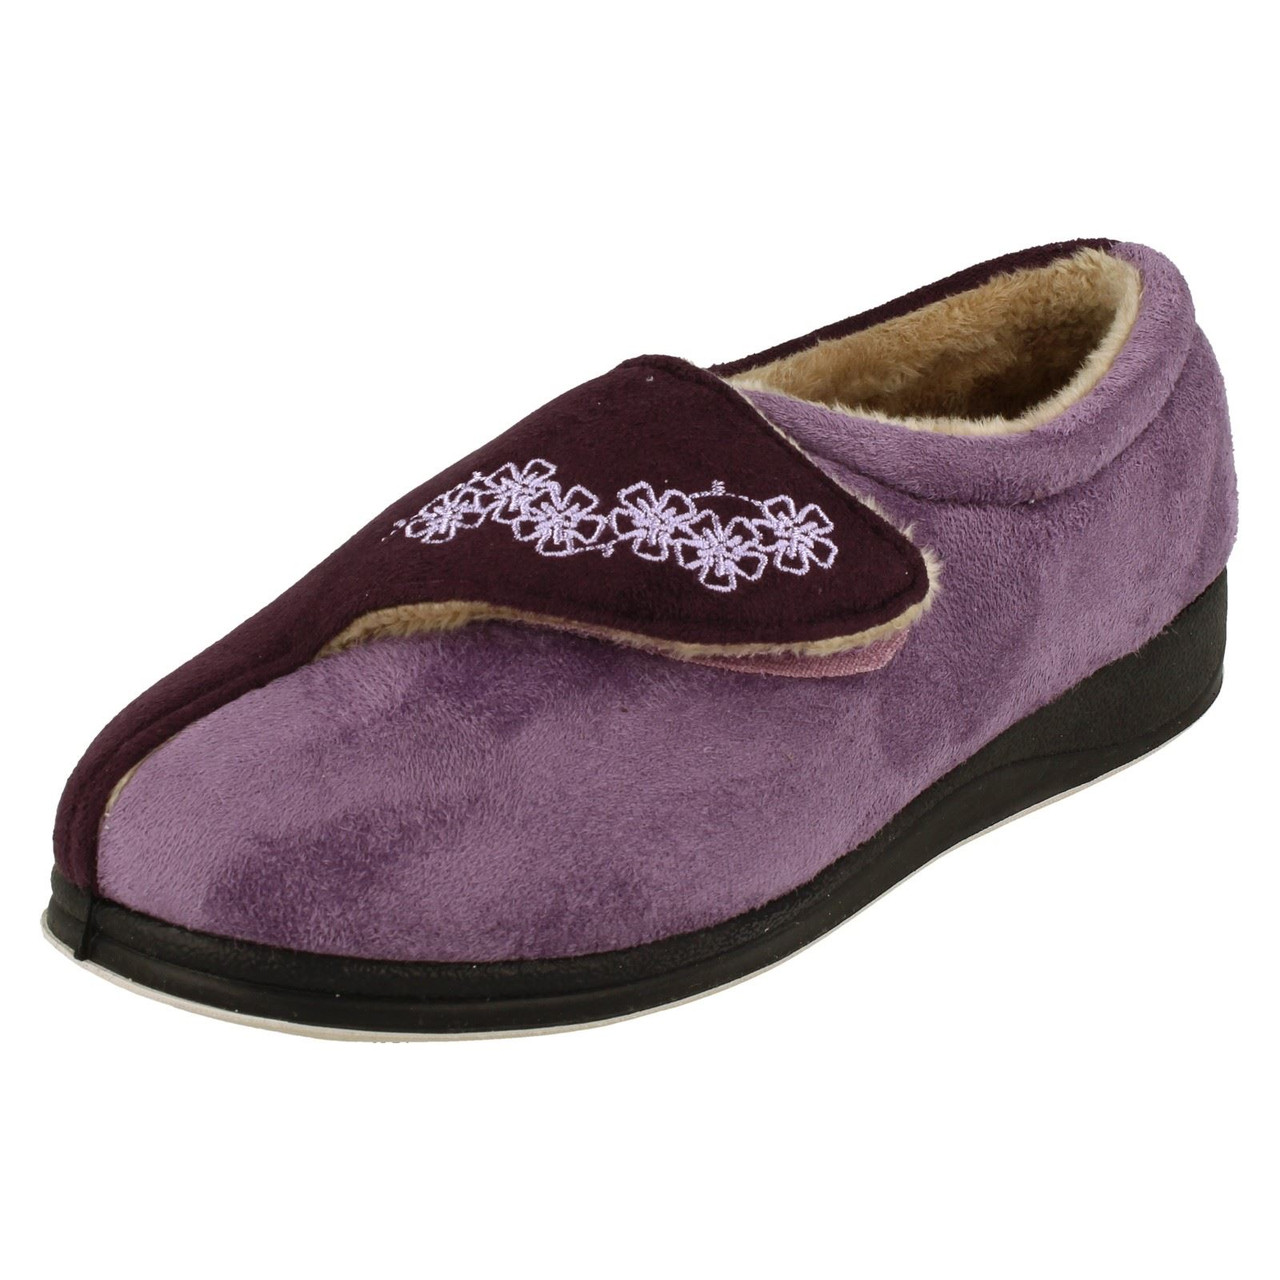 Ladies Women's Natural Wool Warm Slippers Non Slip Hard Sole Embroidered  Mules | eBay